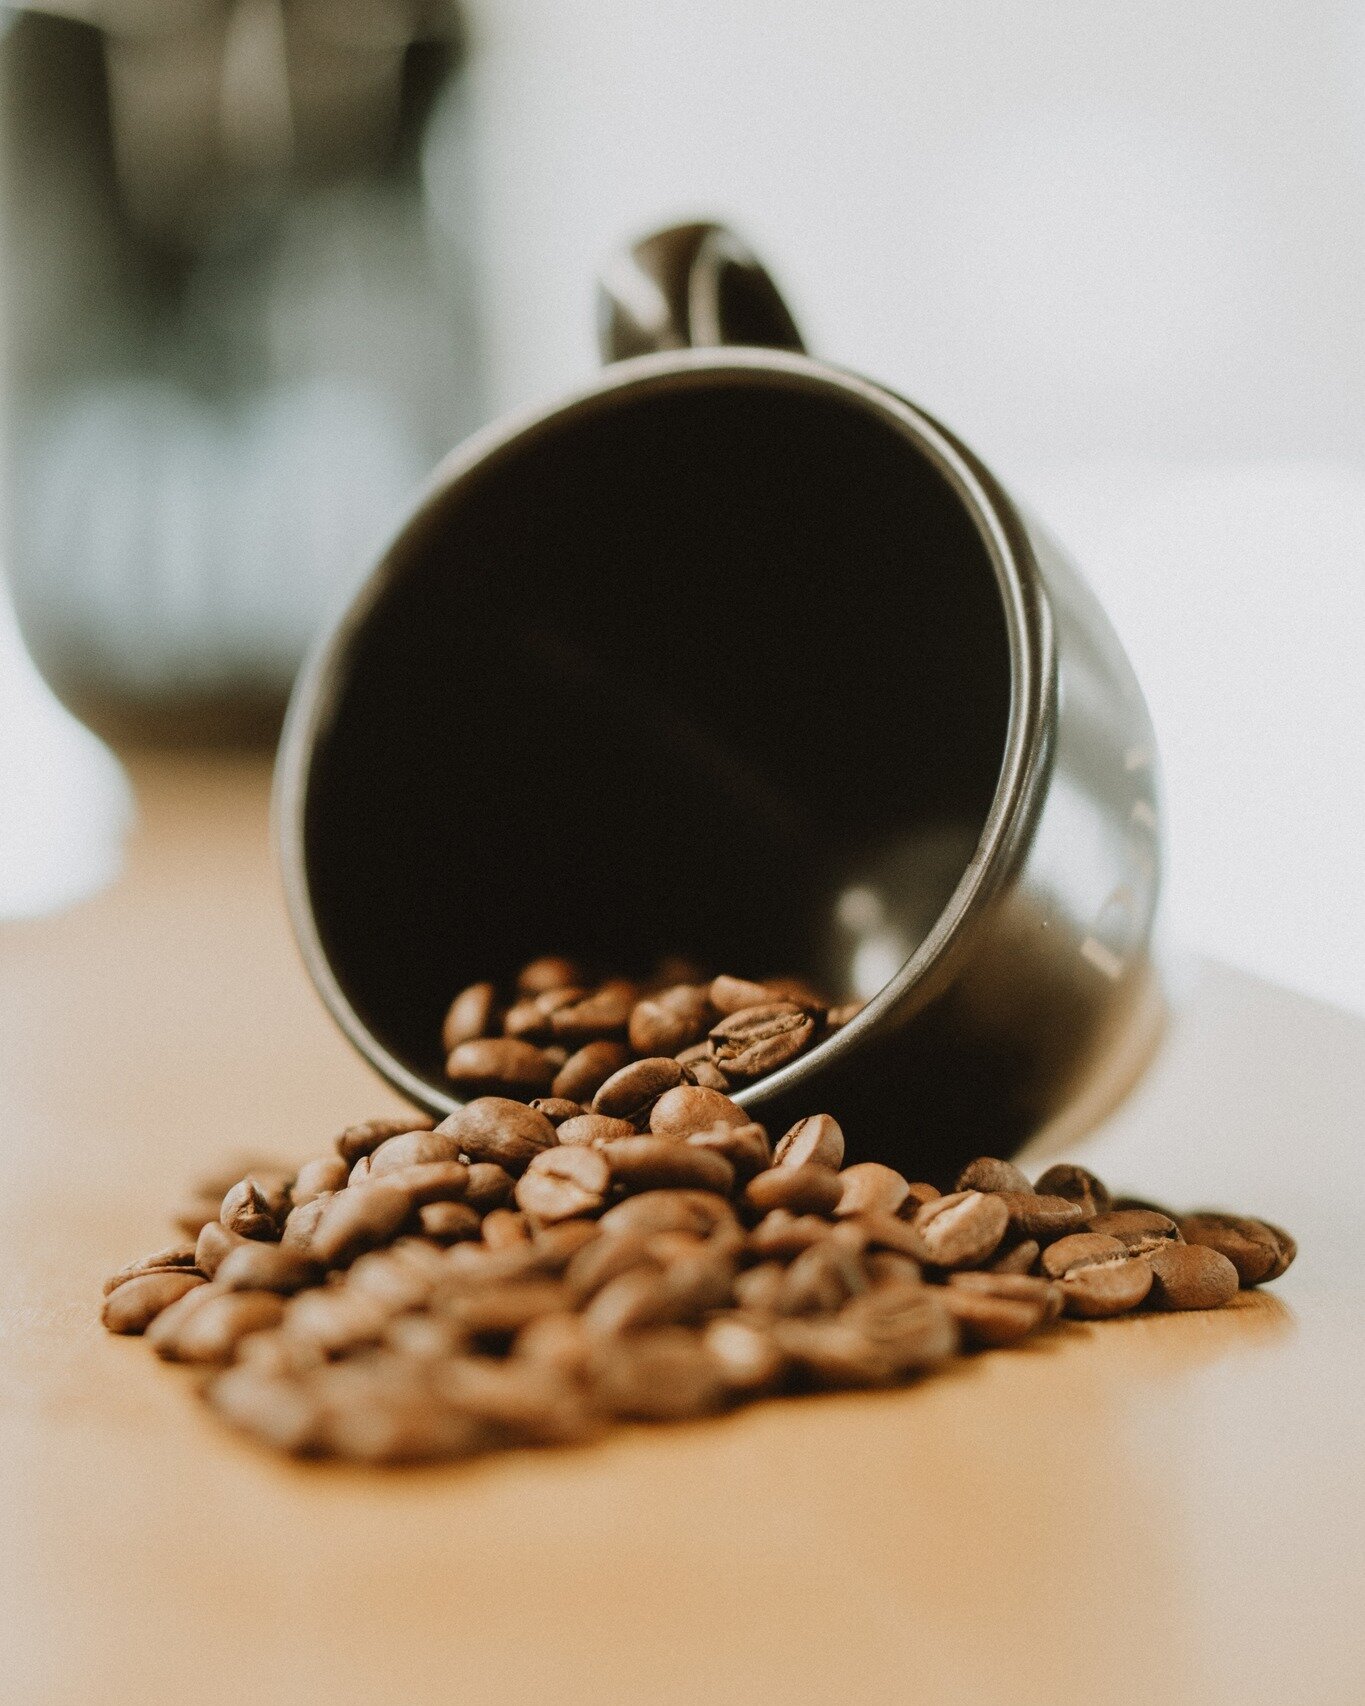 Quality coffee import and roasting are essential steps in delivering a remarkable coffee experience. It begins with sourcing the finest beans from premium plantations, known for clean air and rich soil. These beans, carefully selected and certified f